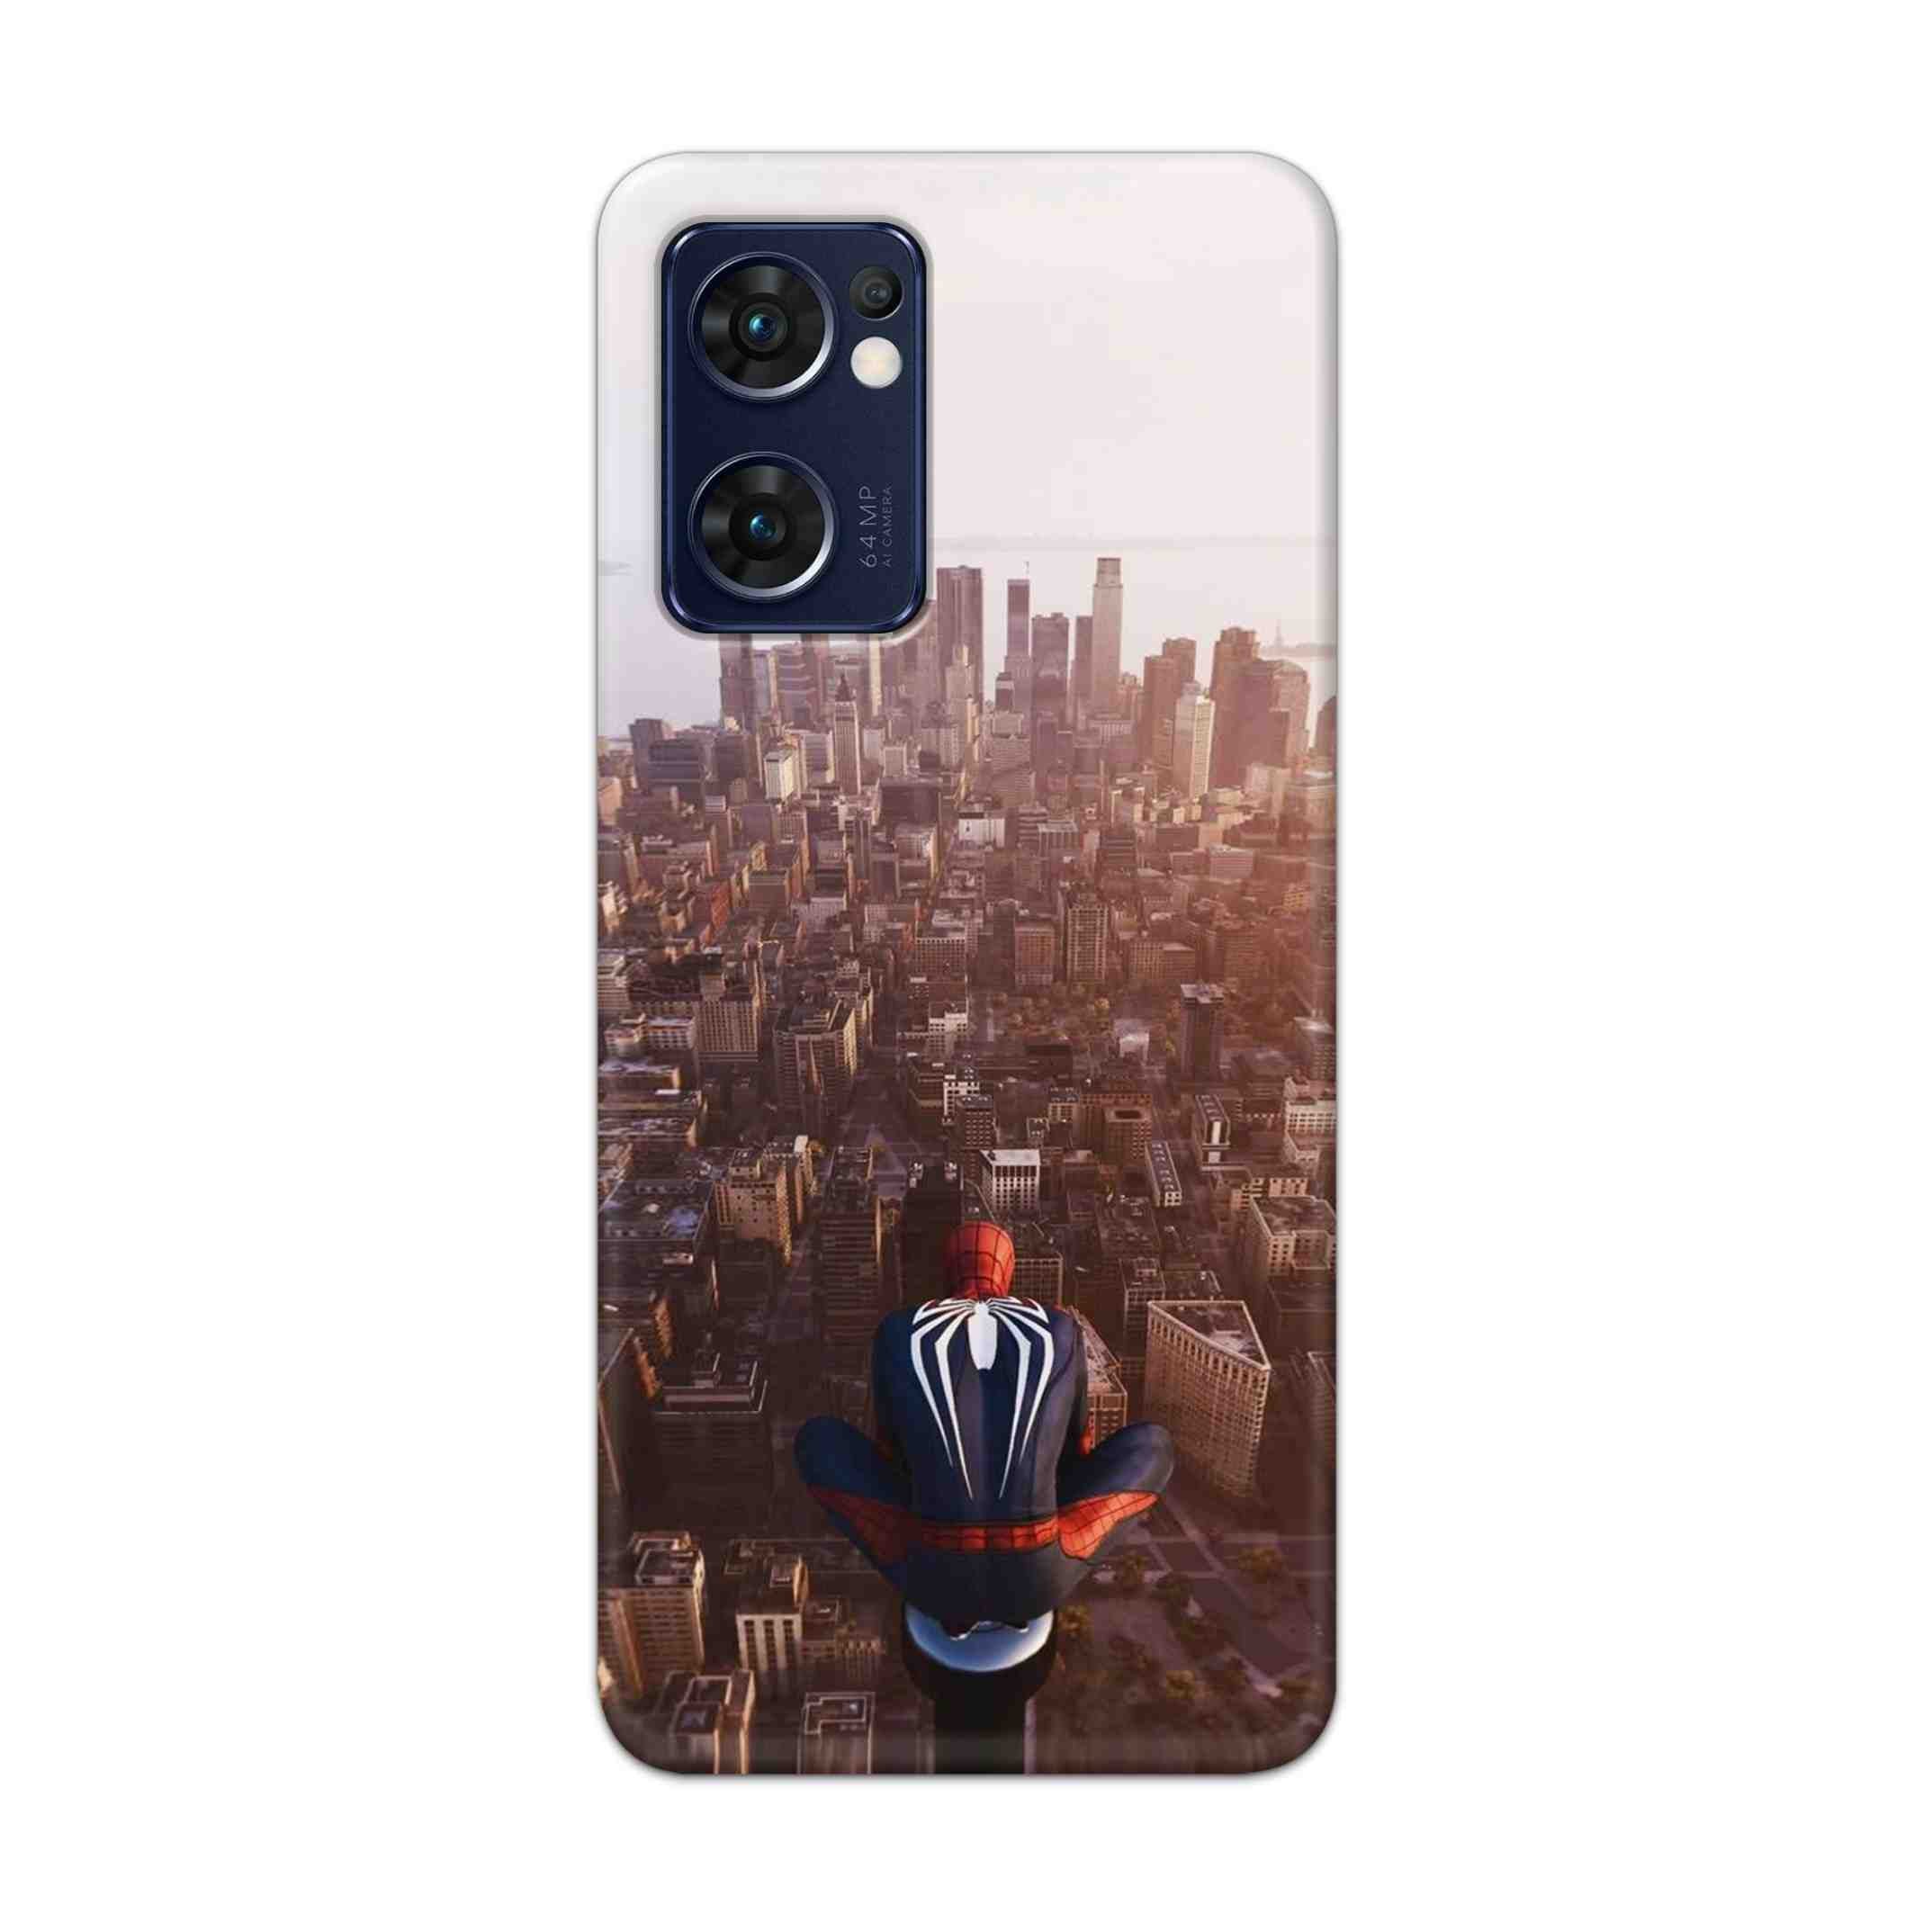 Buy City Of Spiderman Hard Back Mobile Phone Case Cover For Reno 7 5G Online